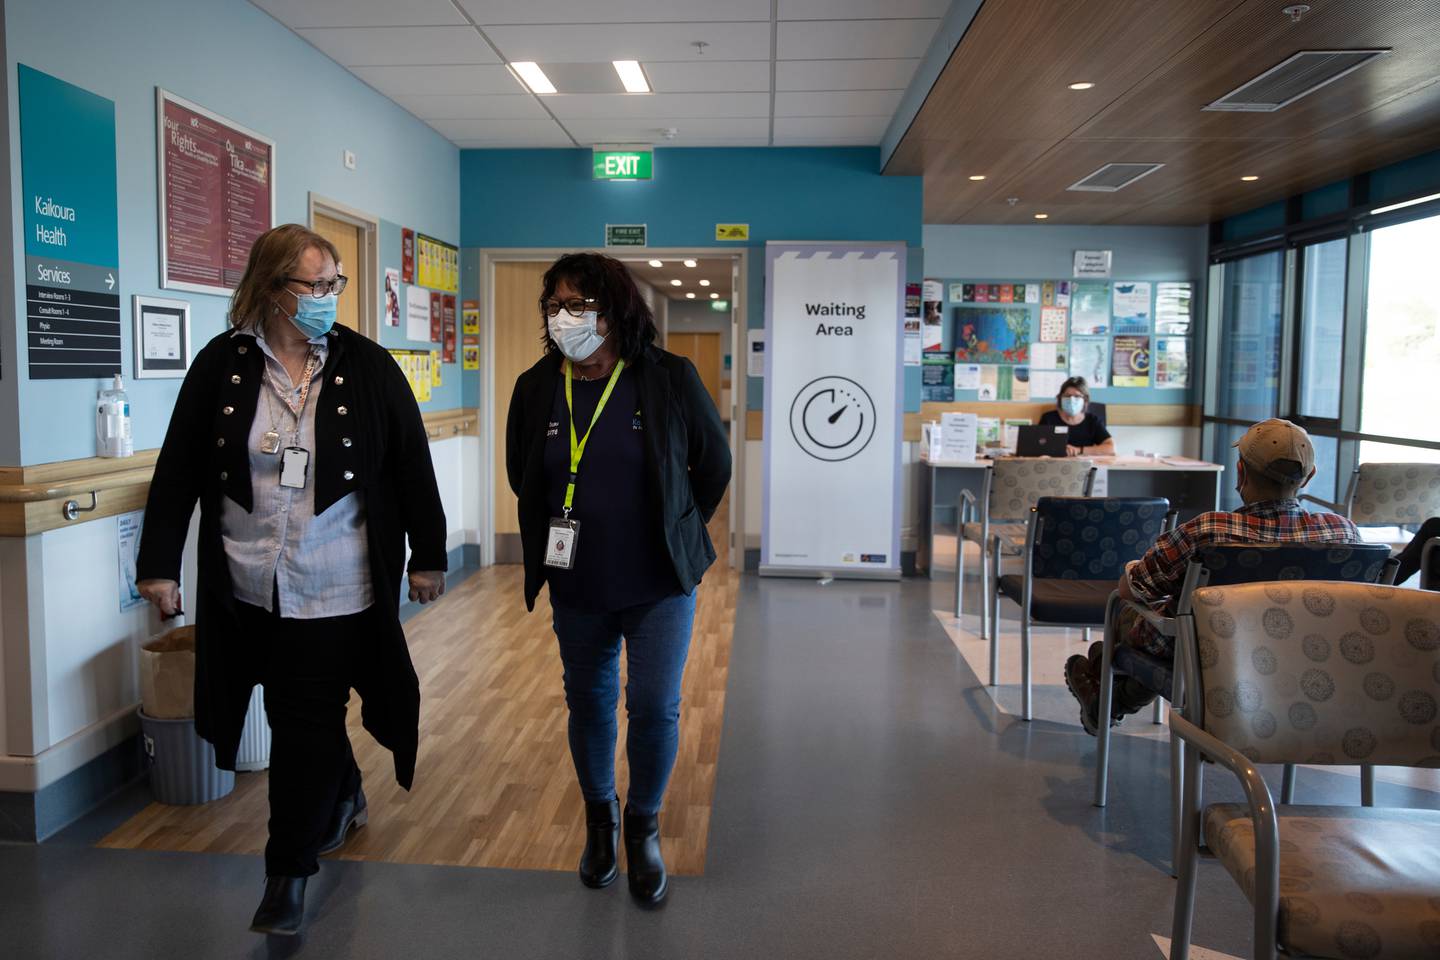 Health services manager at Kaikōura Healthcare Angela Blunt told the Herald although it was a surprise, she has known for a while they have been doing well. Photo / George Heard